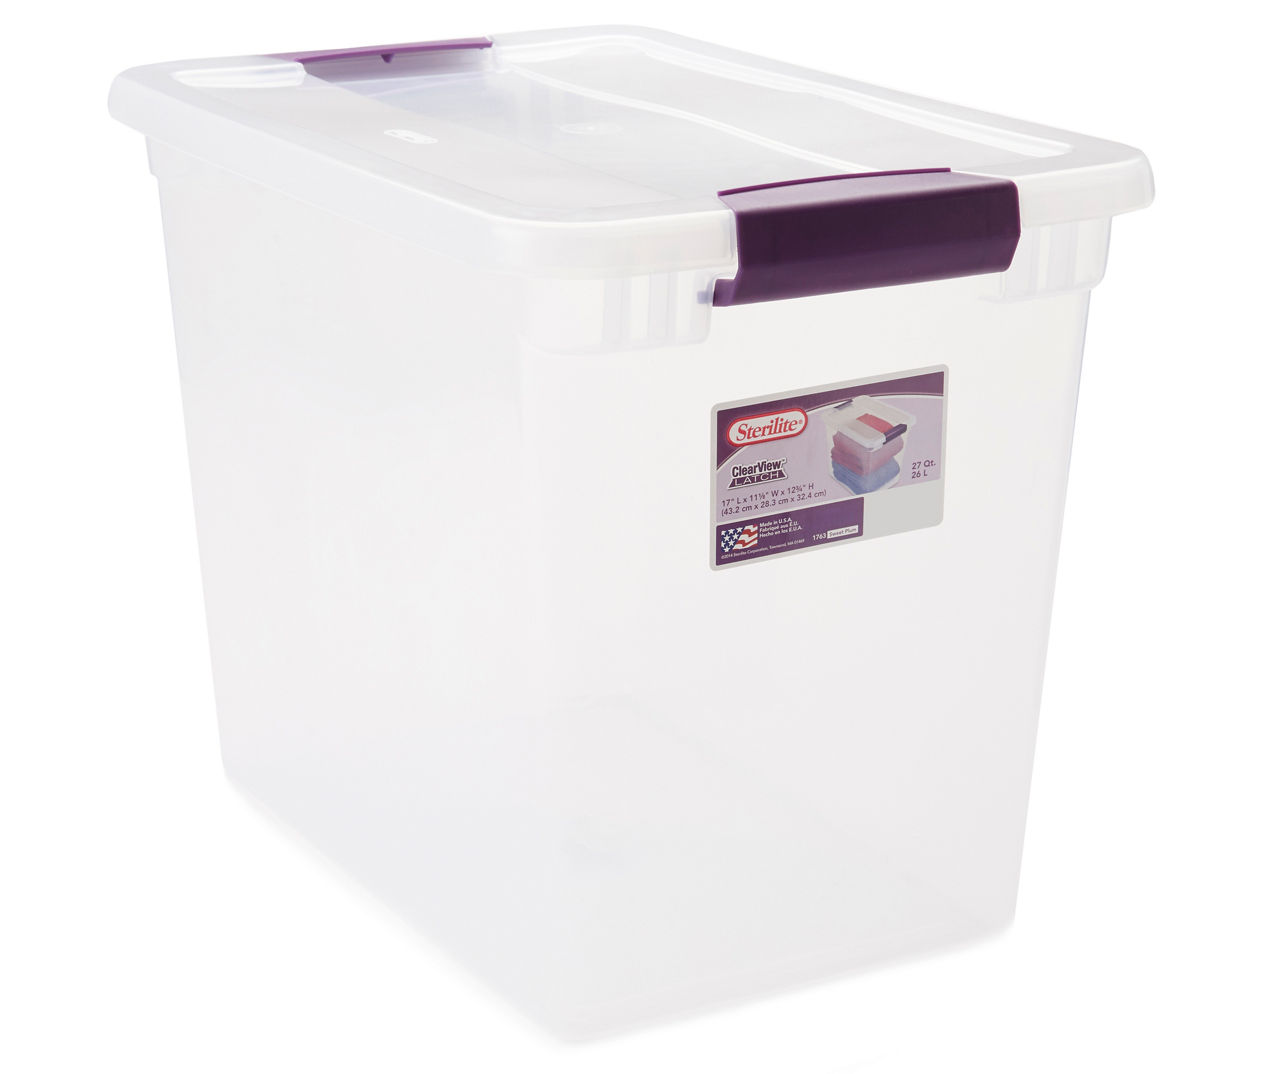 Sterilite 66qt Box - Red Tint with Red Lid and Green Latches – Target  Inventory Checker – BrickSeek